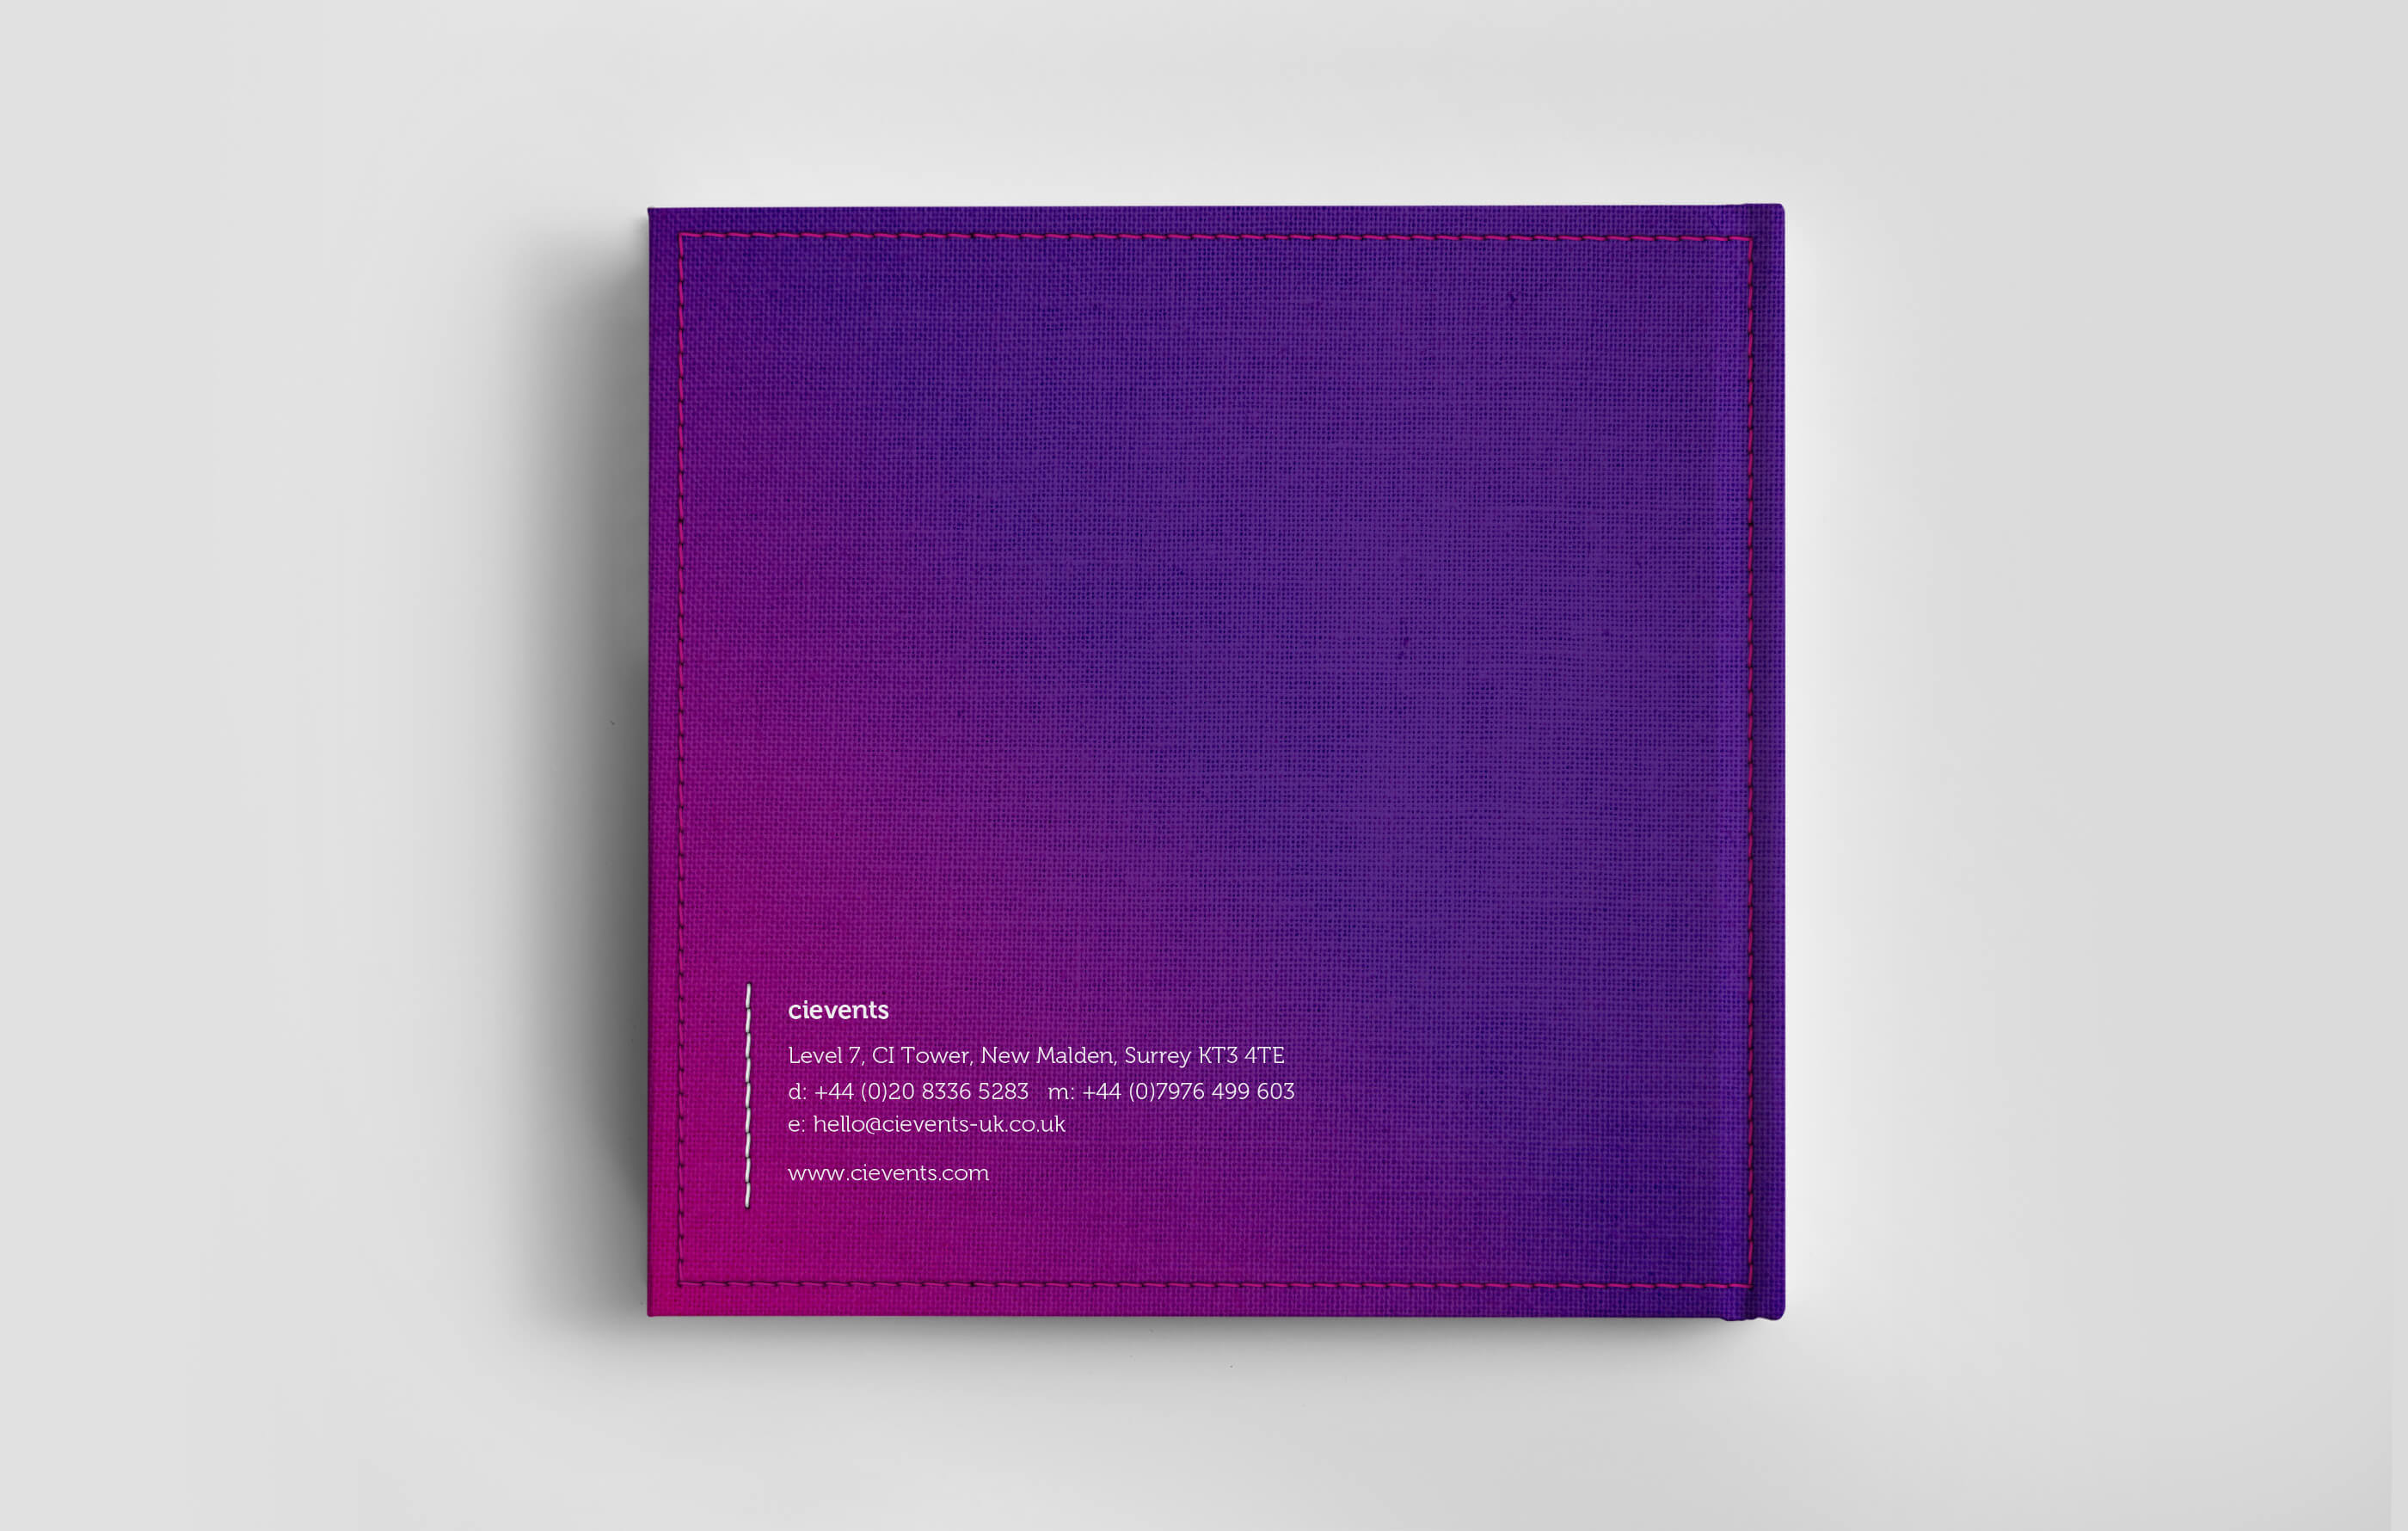 Hardback back cover of the square DFS proposal brochure, wrapped in a purple and pink coloured fabric